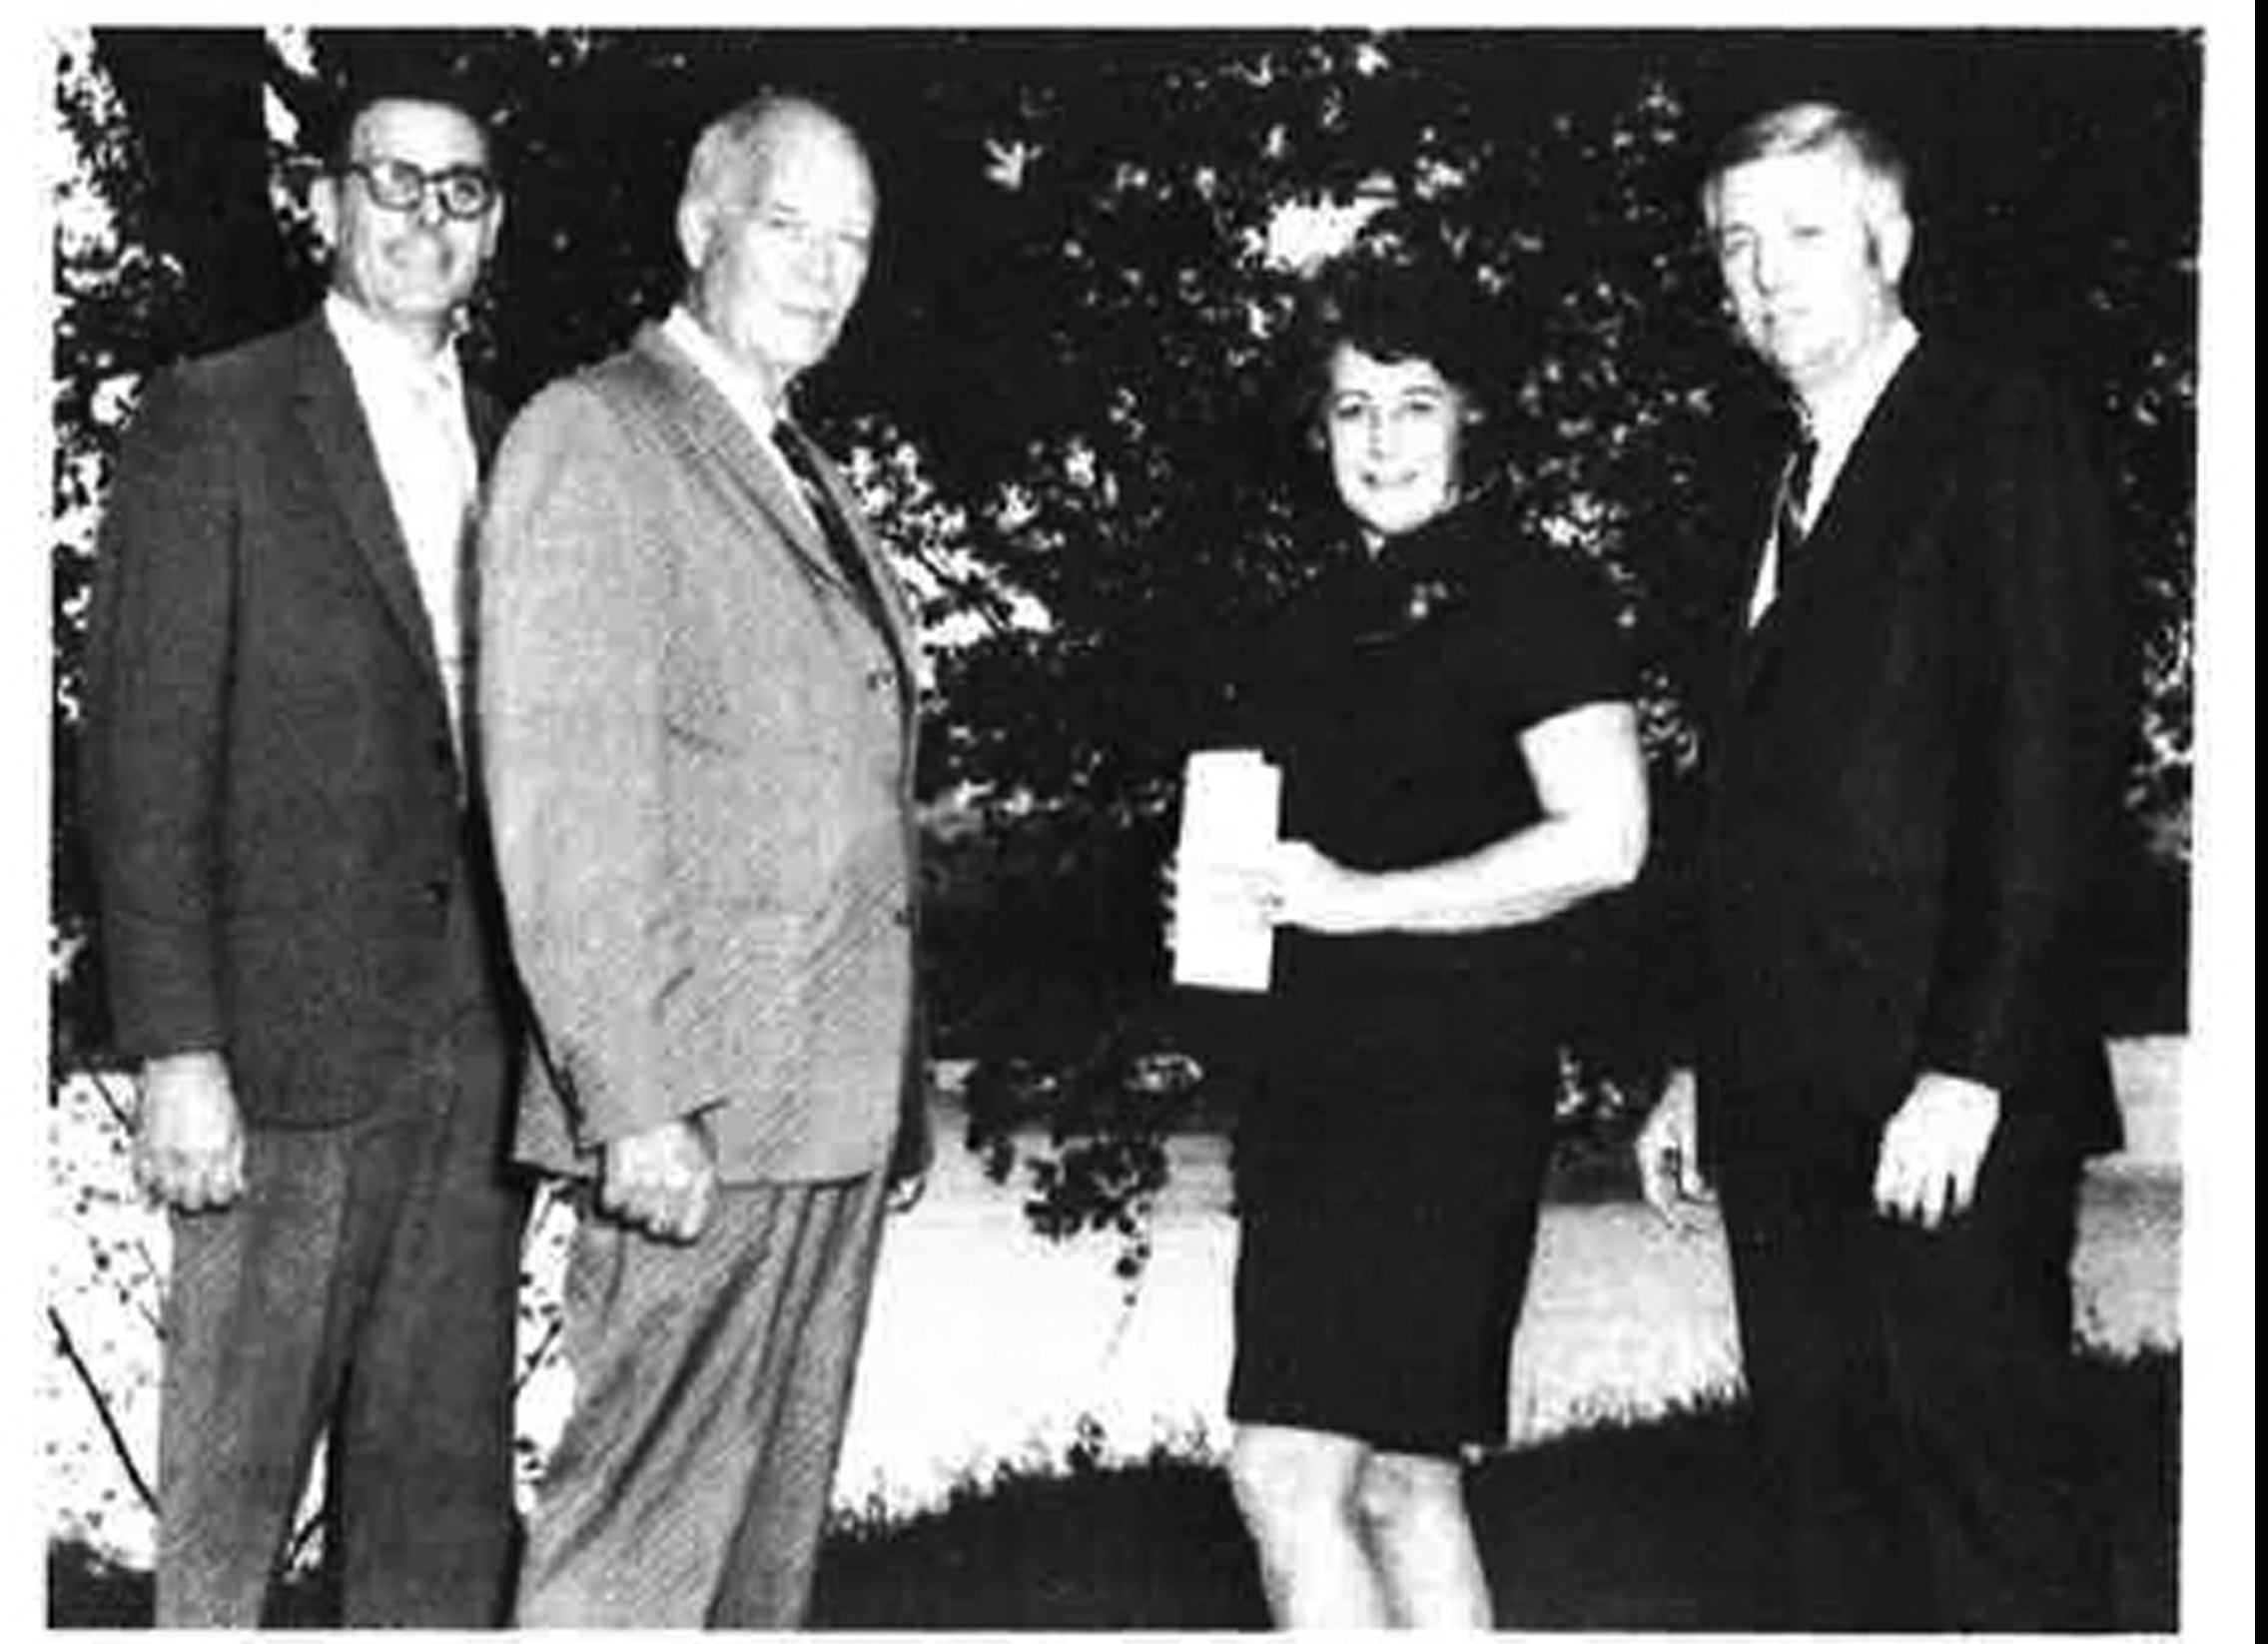 Engineer Russell Fish, Ecologist Dr. Frank Blair, Mrs. Fagan Dickson & Attorney Frank Booth (Austin Chamber of Commerce Magazine, May 1970)